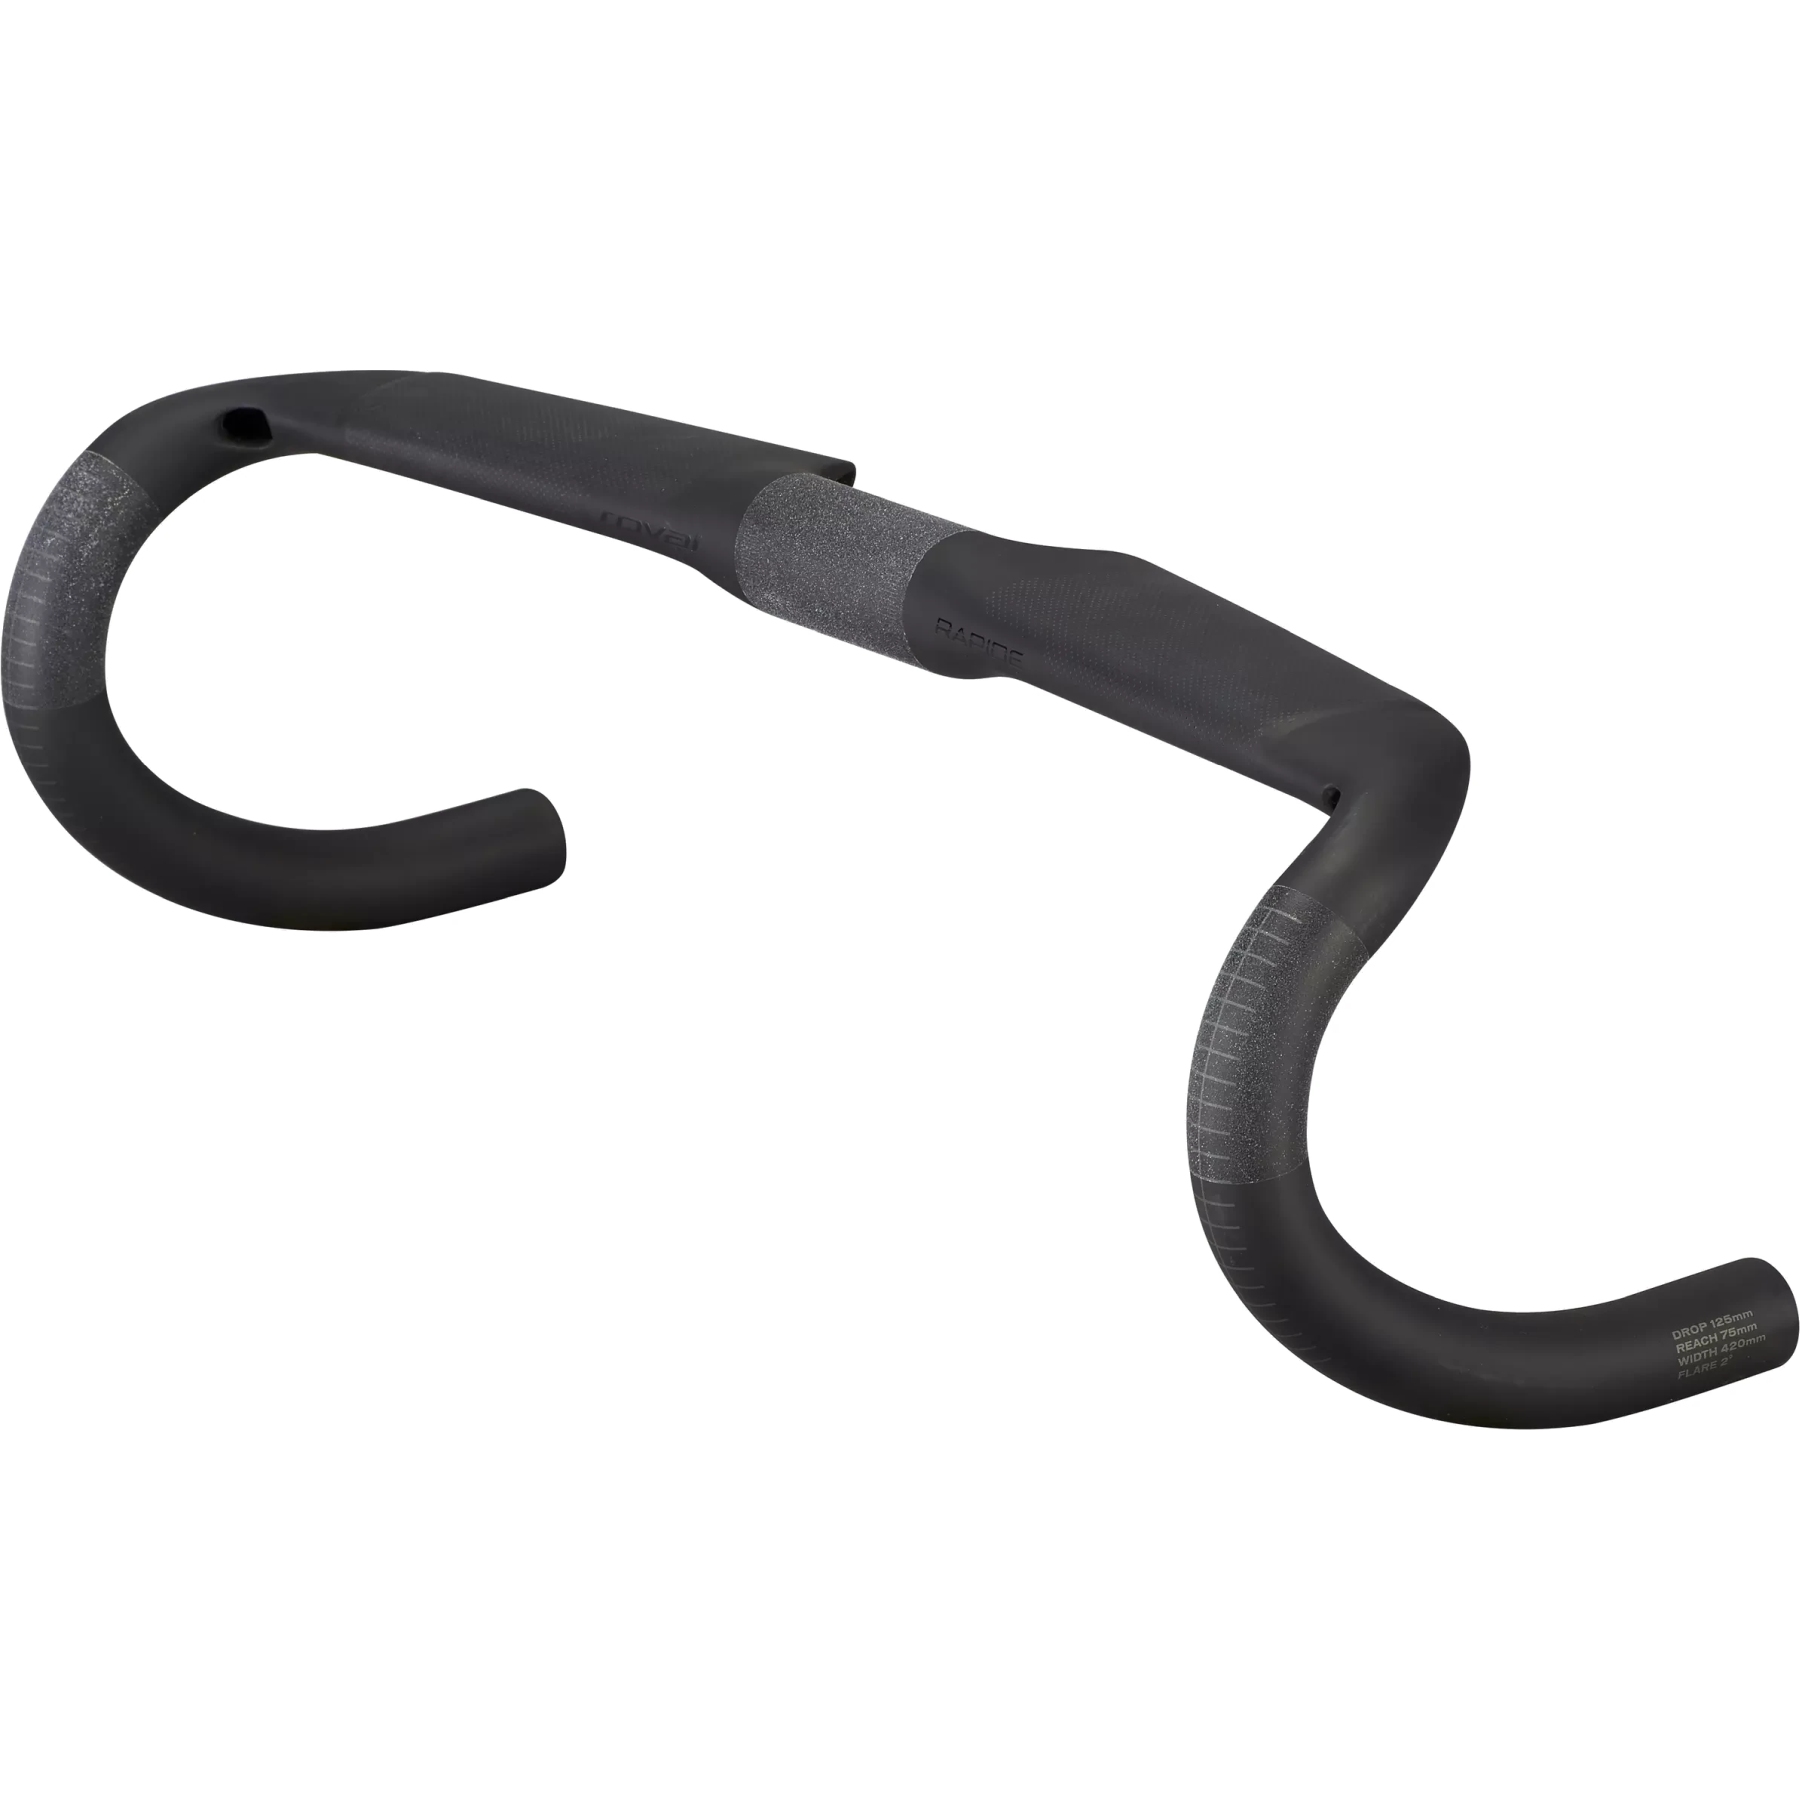 Productfoto van Specialized Roval Rapide Road Handlebar 31.8 - Black/Charcoal